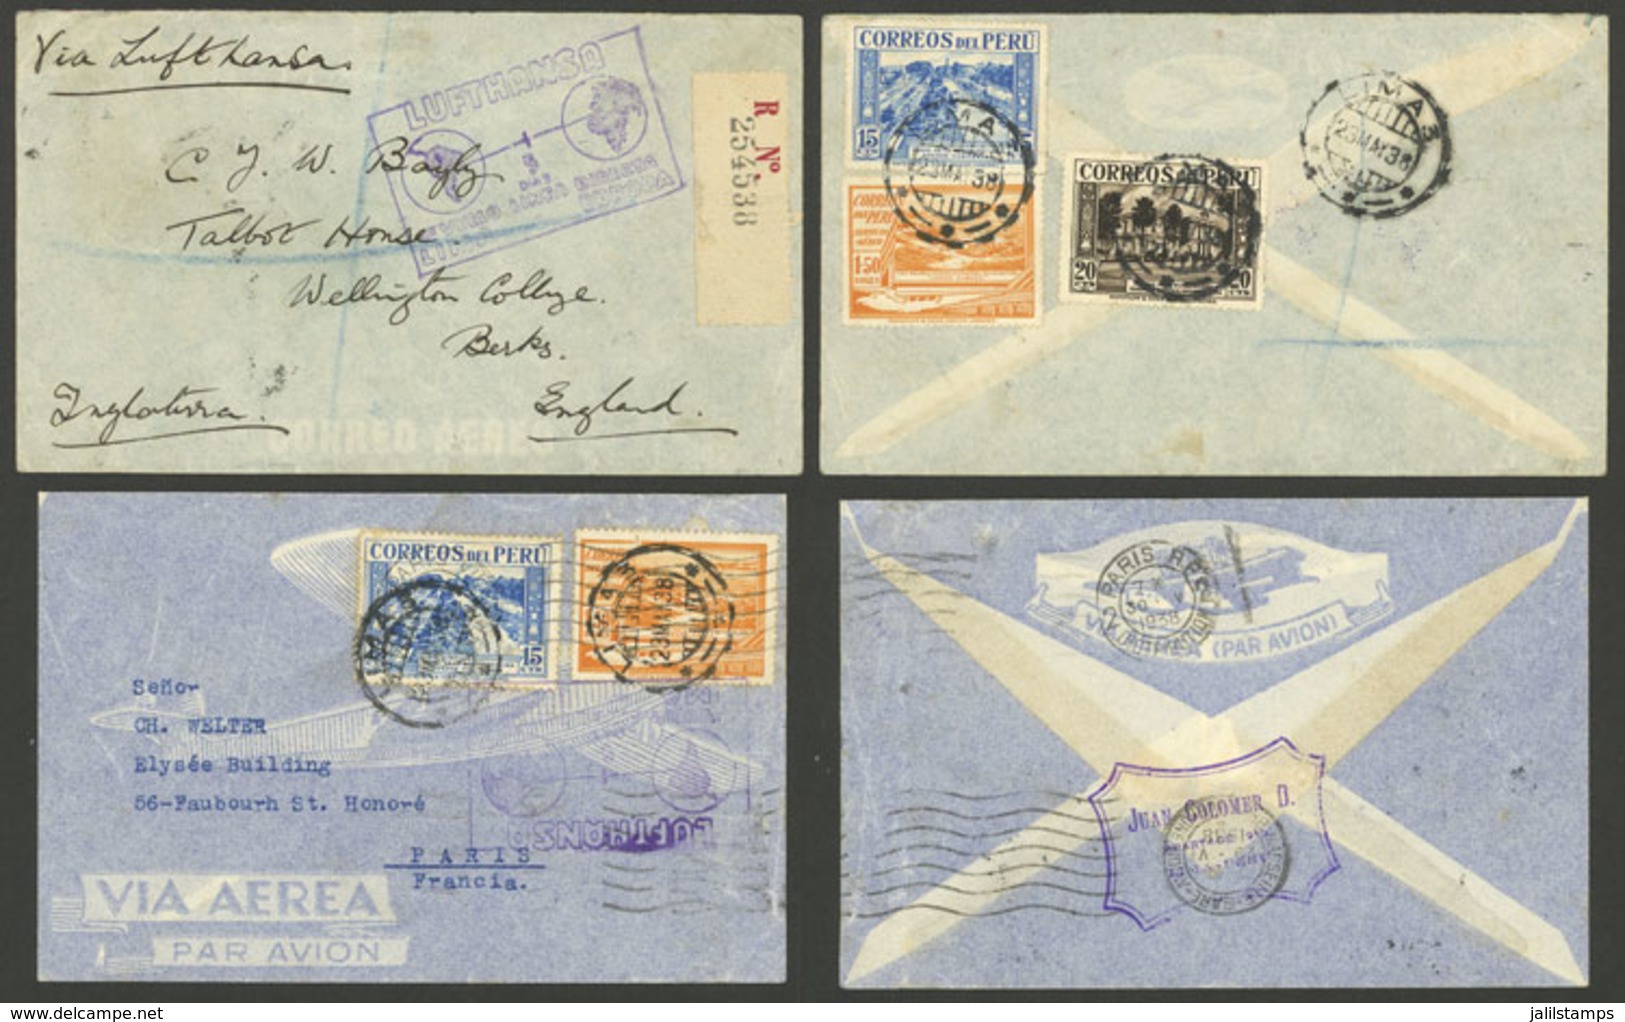 PERU: 23/MAY/1938 First Flight Lima - Europe By Lufthansa, 2 Covers Sent To England And France, The Former Registered, B - Perú